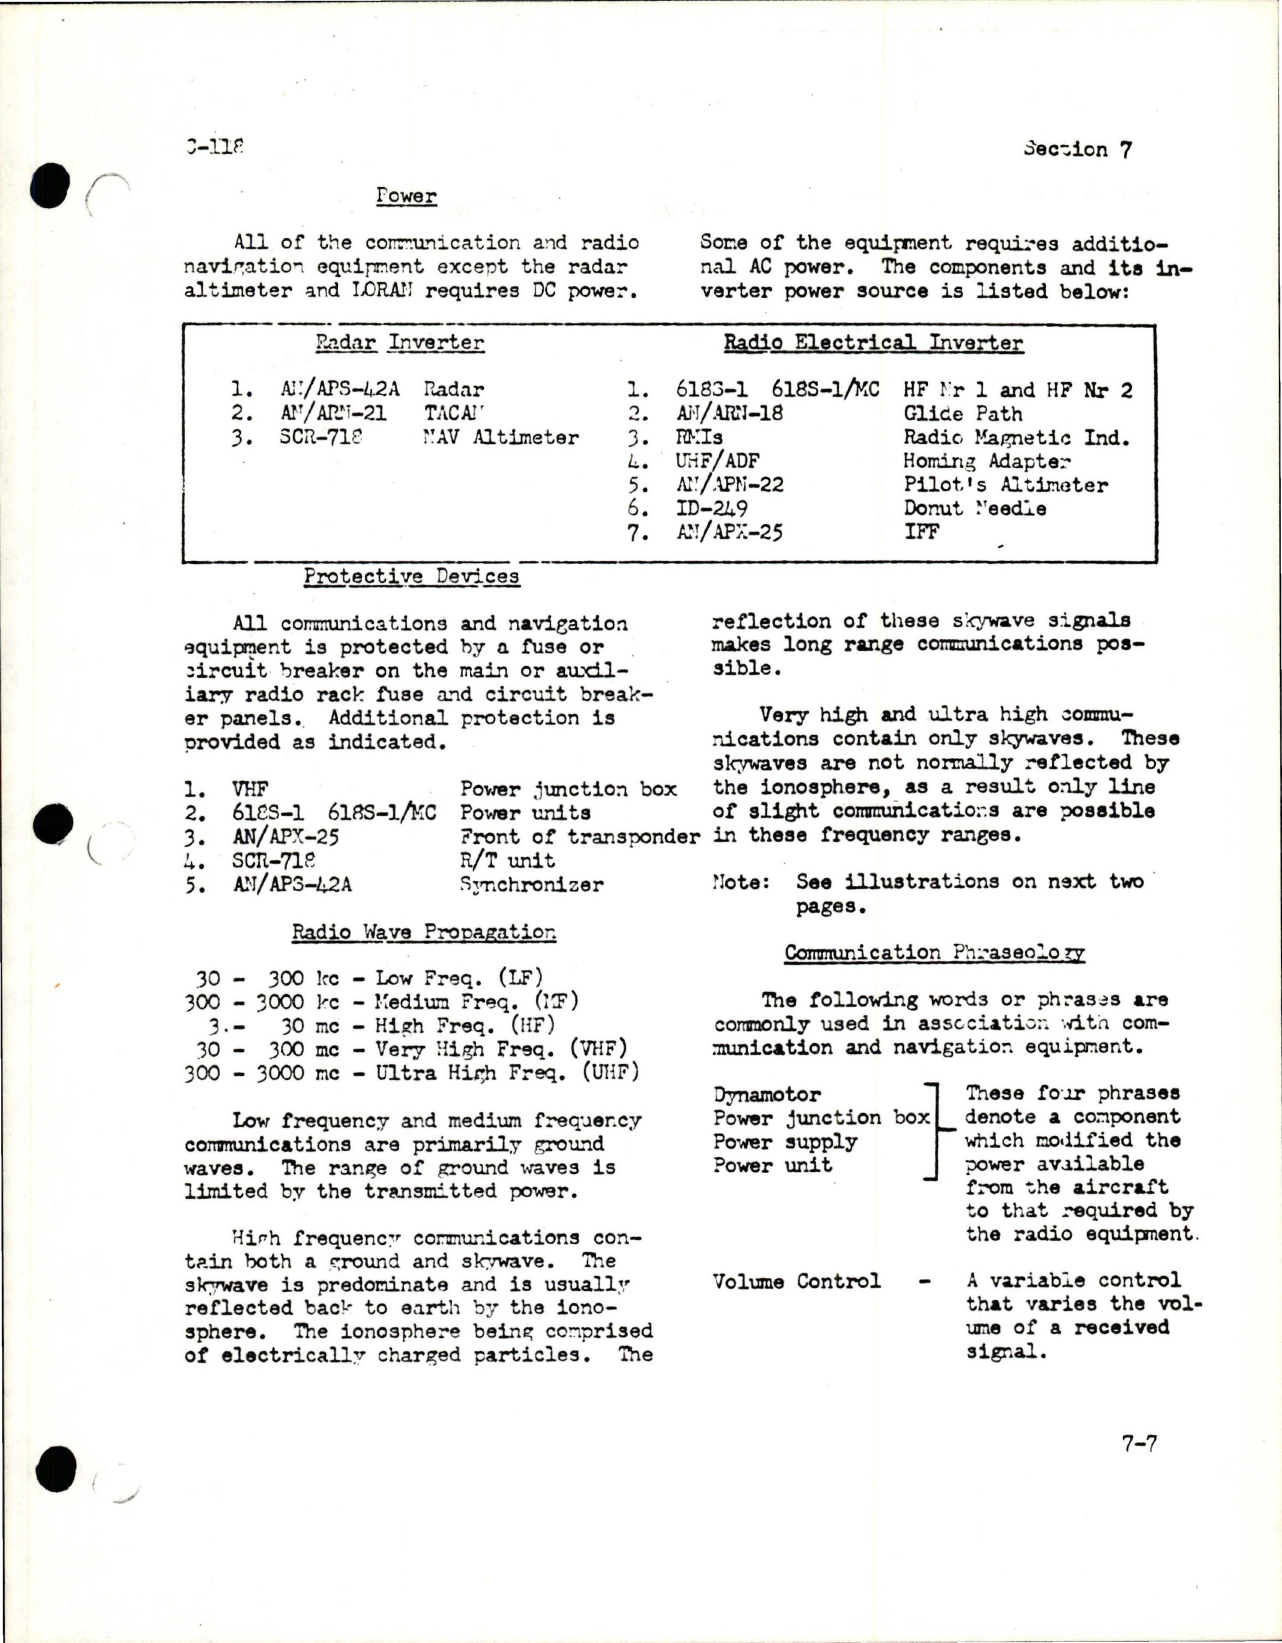 Sample page 7 from AirCorps Library document: Communications for C-118 - Section 7